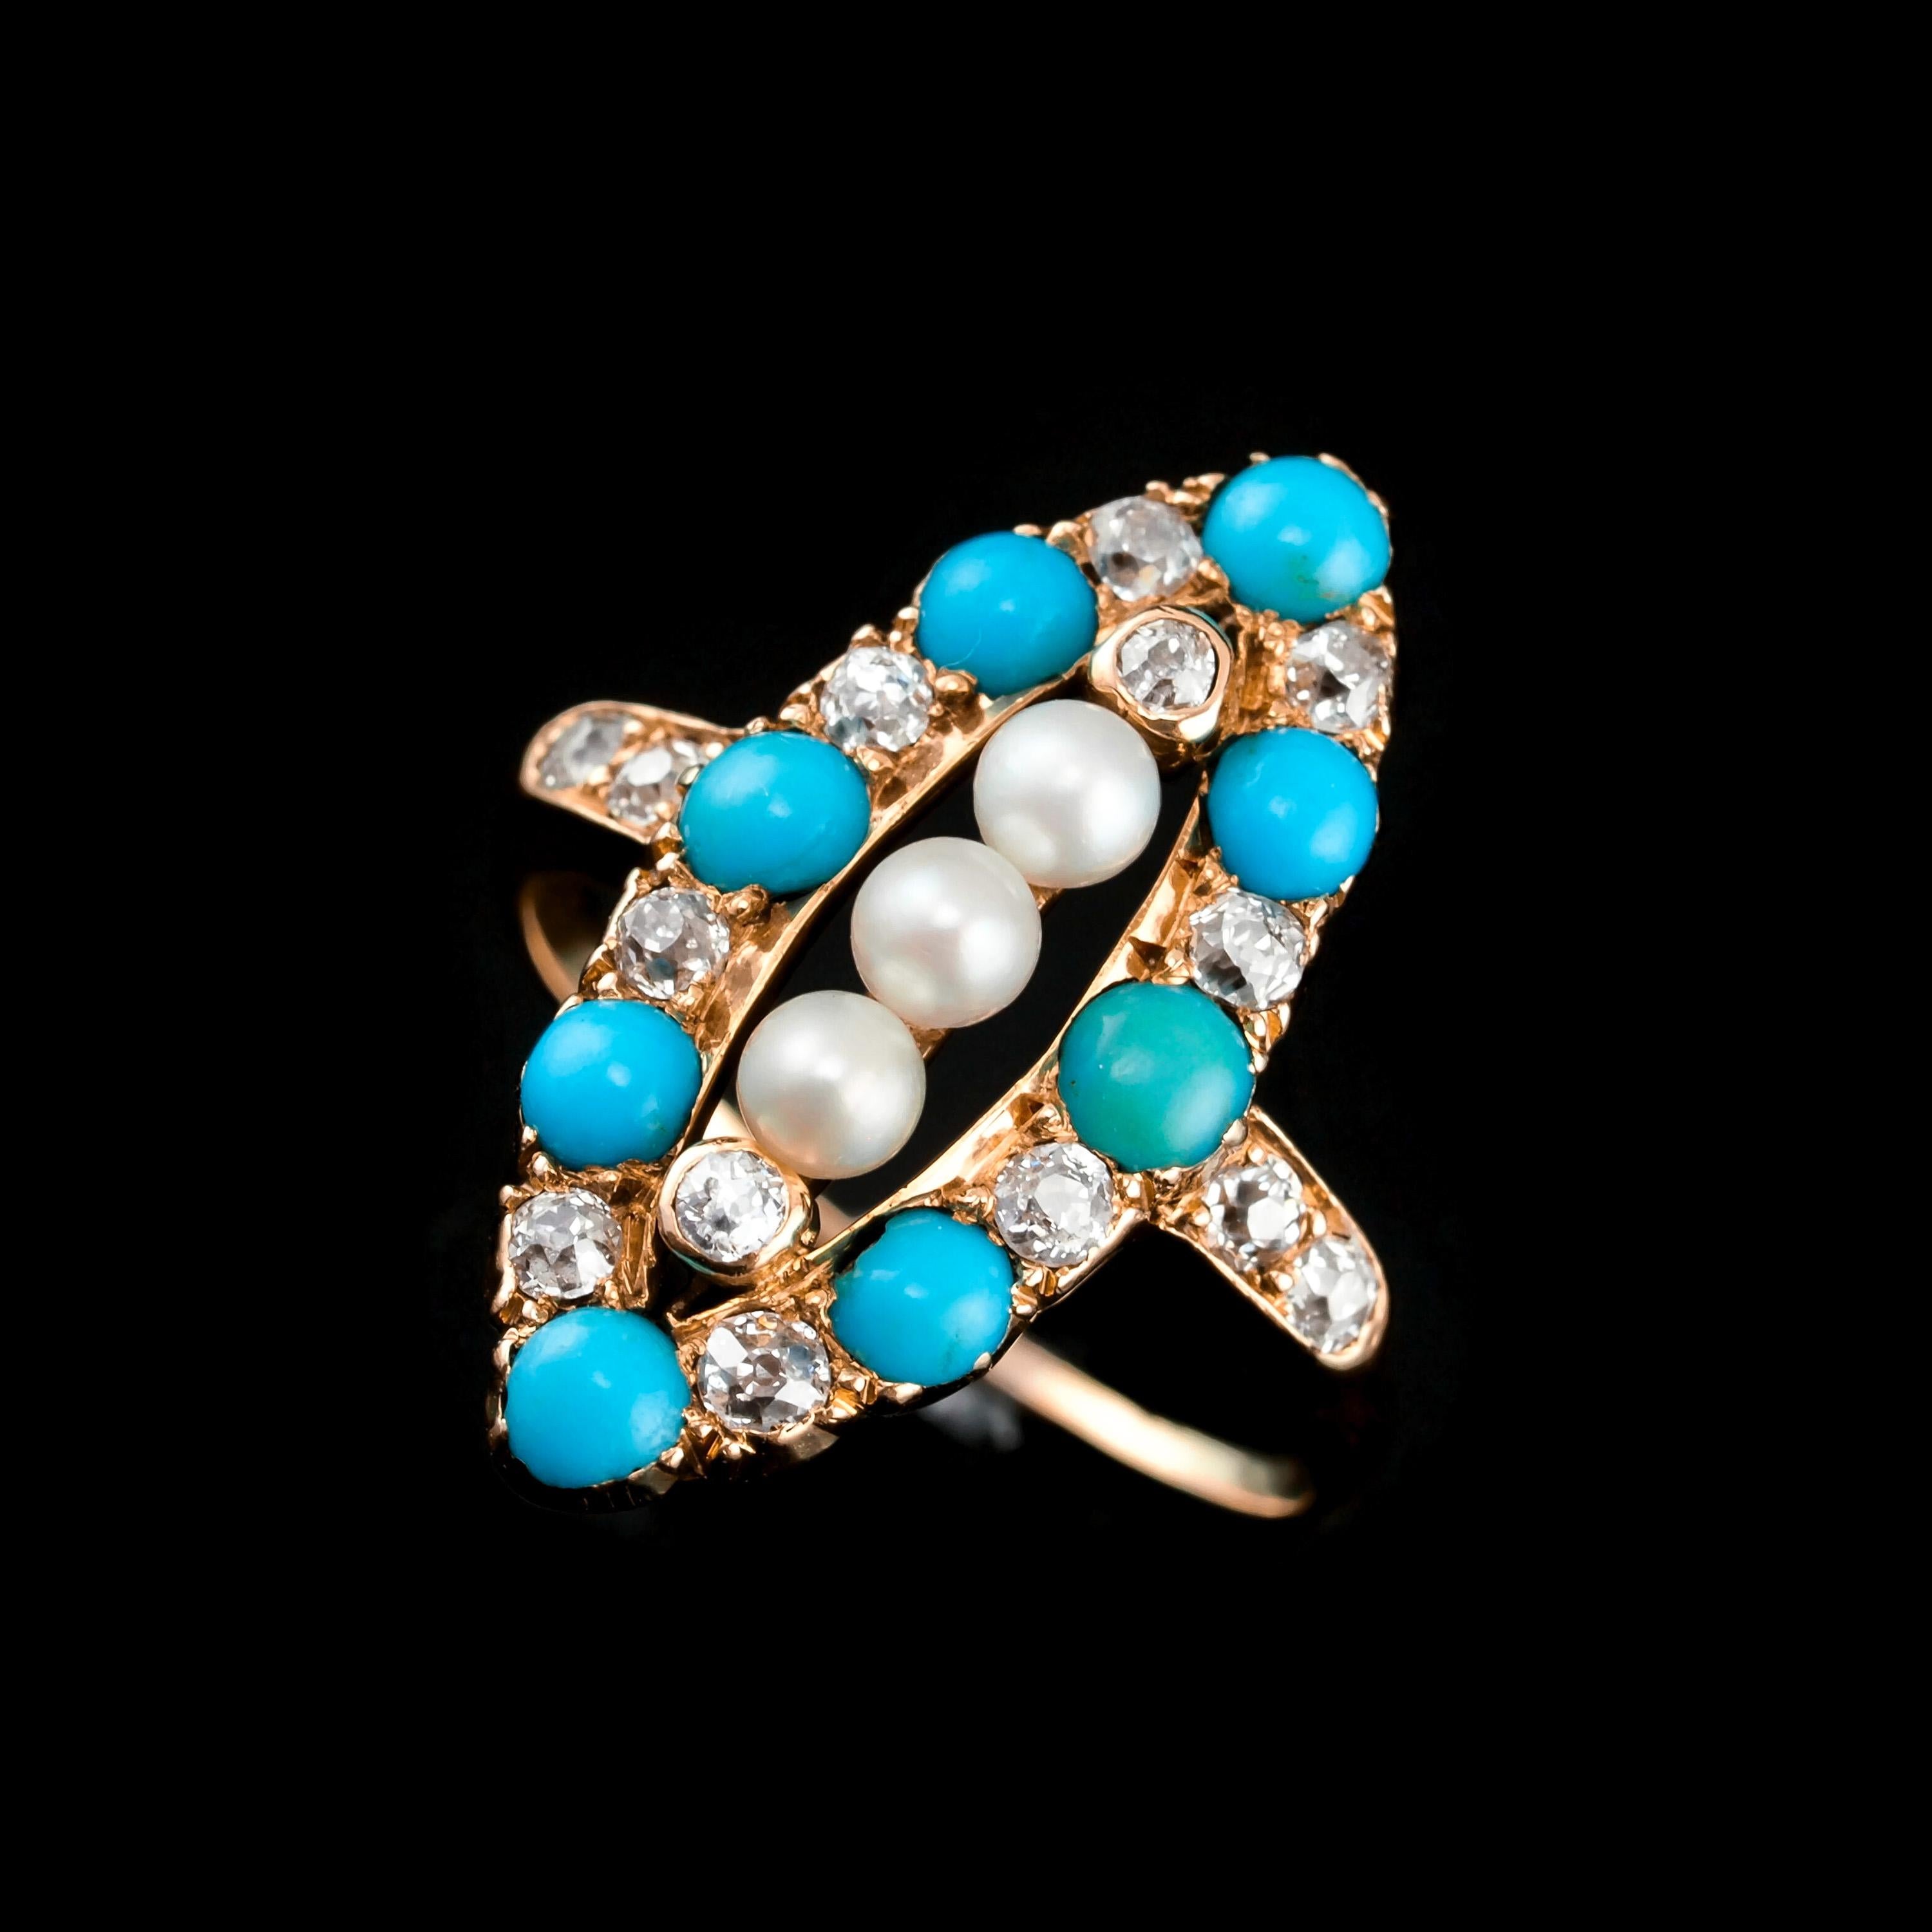 We are delighted to offer this splendid antique Victorian 18ct gold turquoise, pearl and diamond ring made c.1880. 
 
The ring features such a lovely and delightful design with a standout colour combination of blue and white, contrasted with